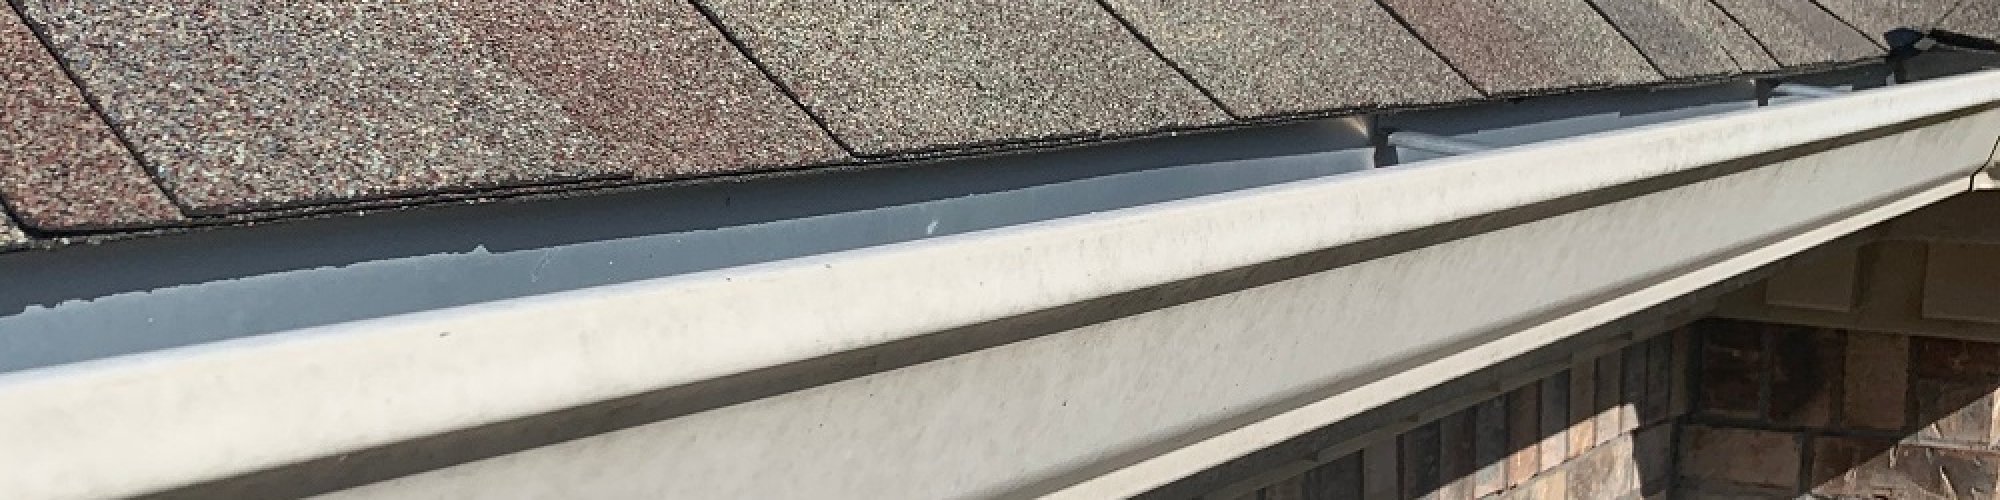 Clean Pro Gutter Cleaning Fort Worth